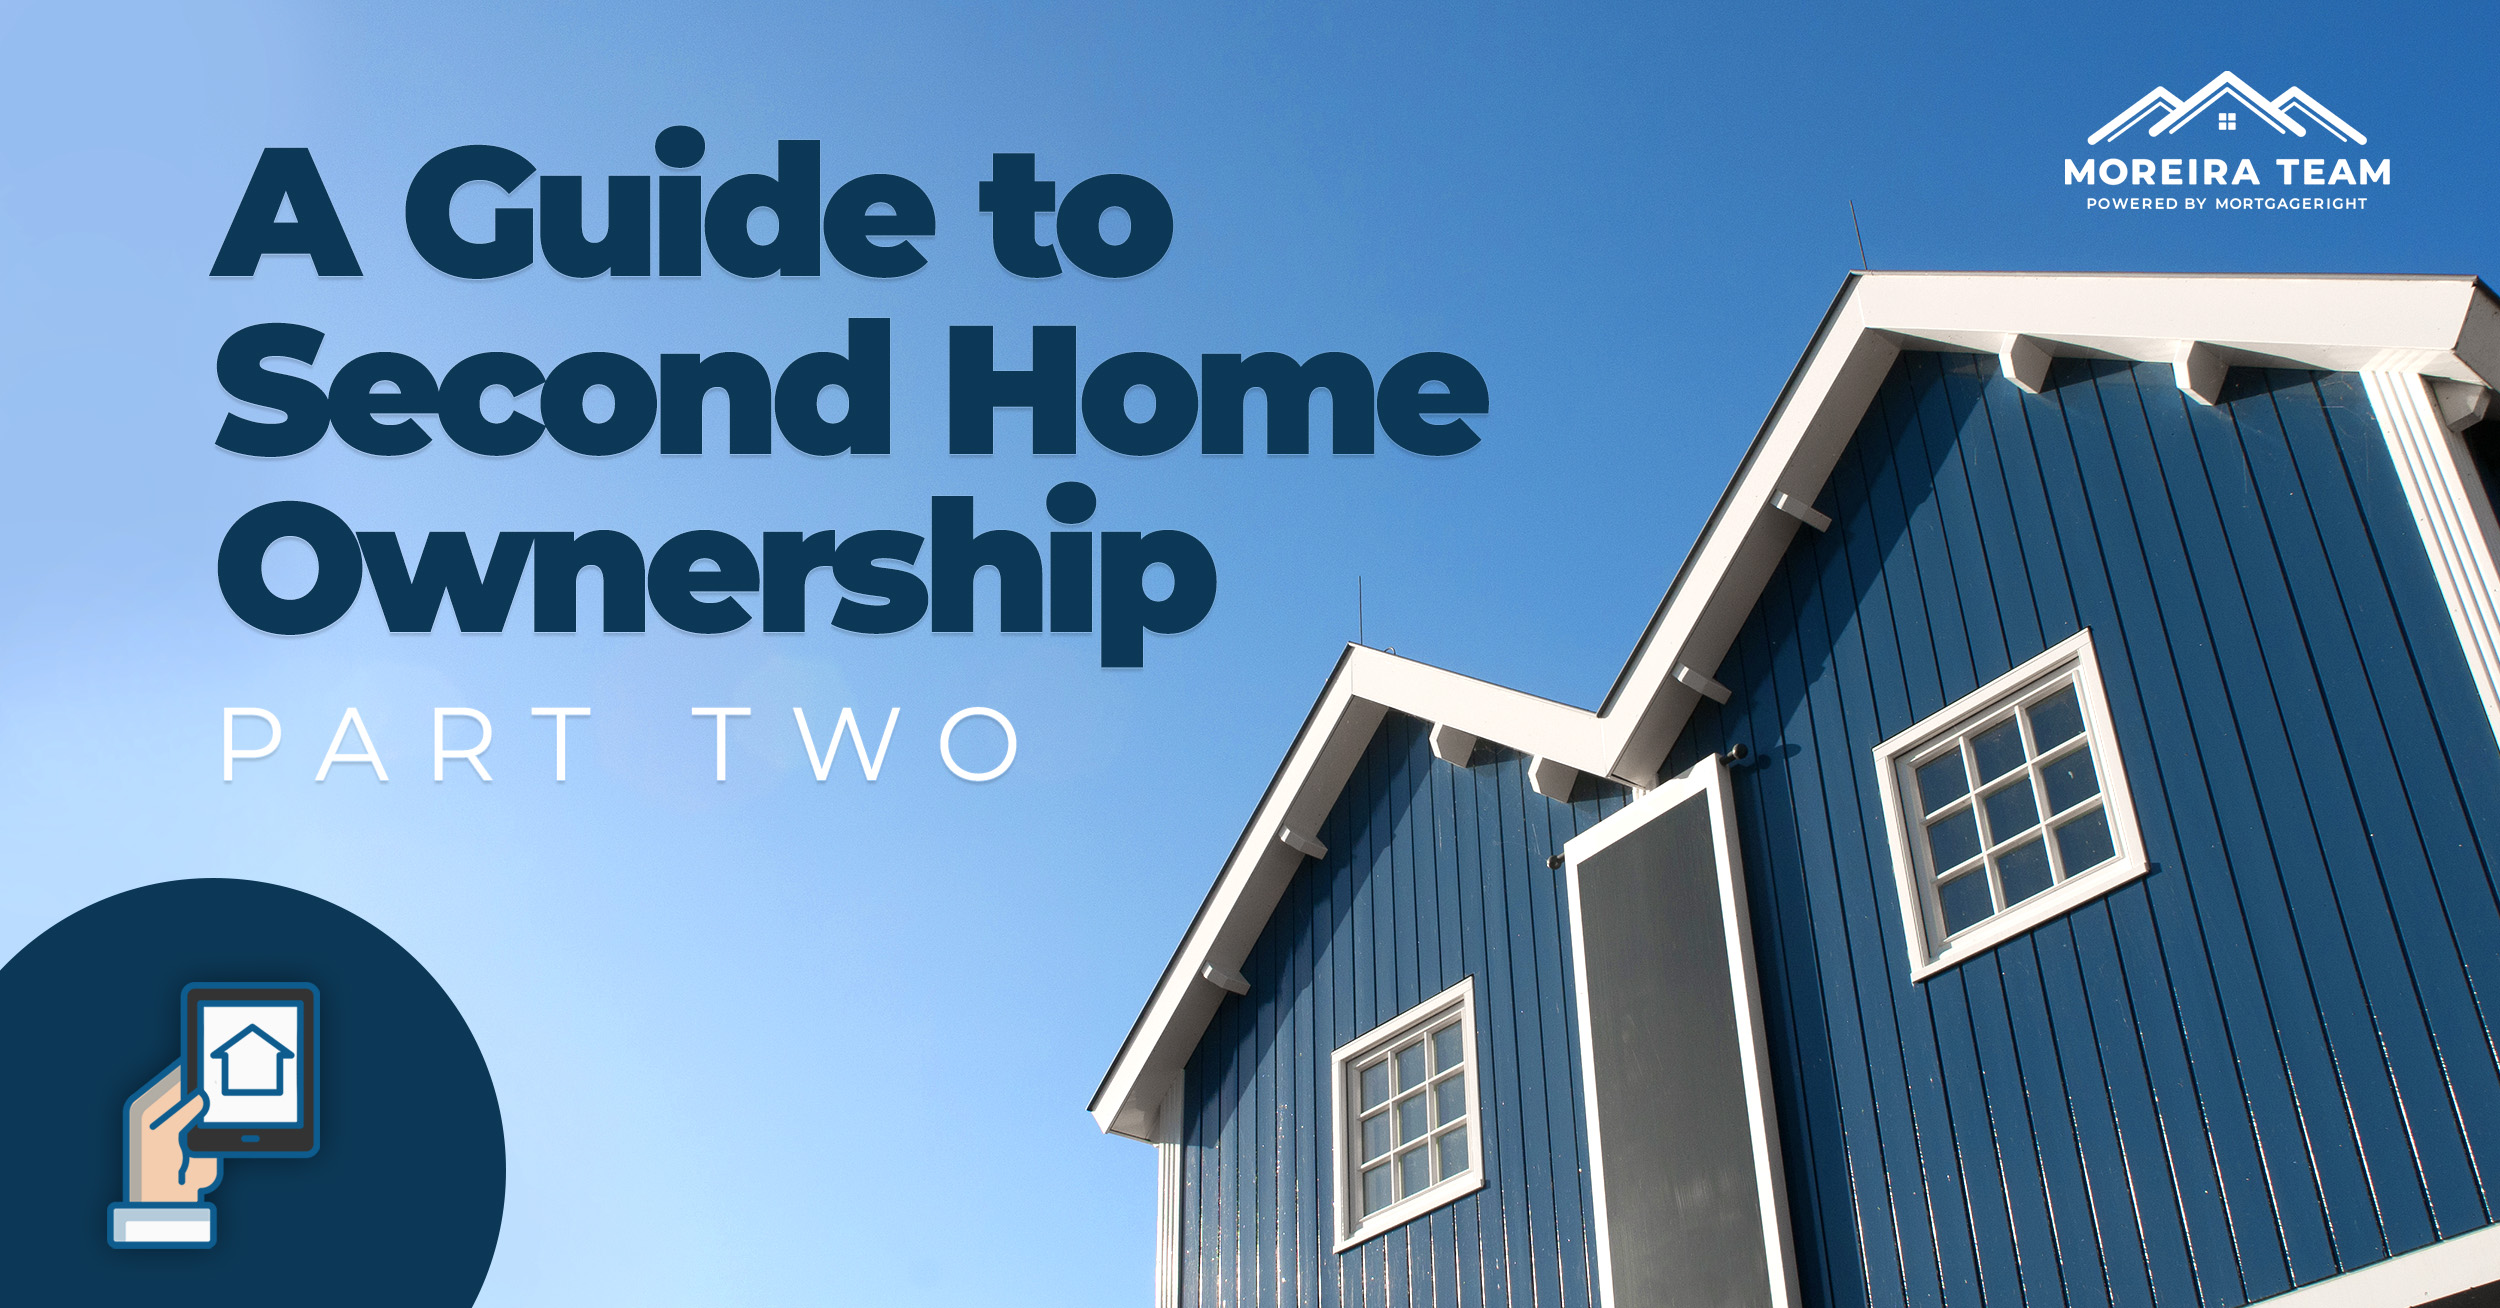 A guide to owning a second home.